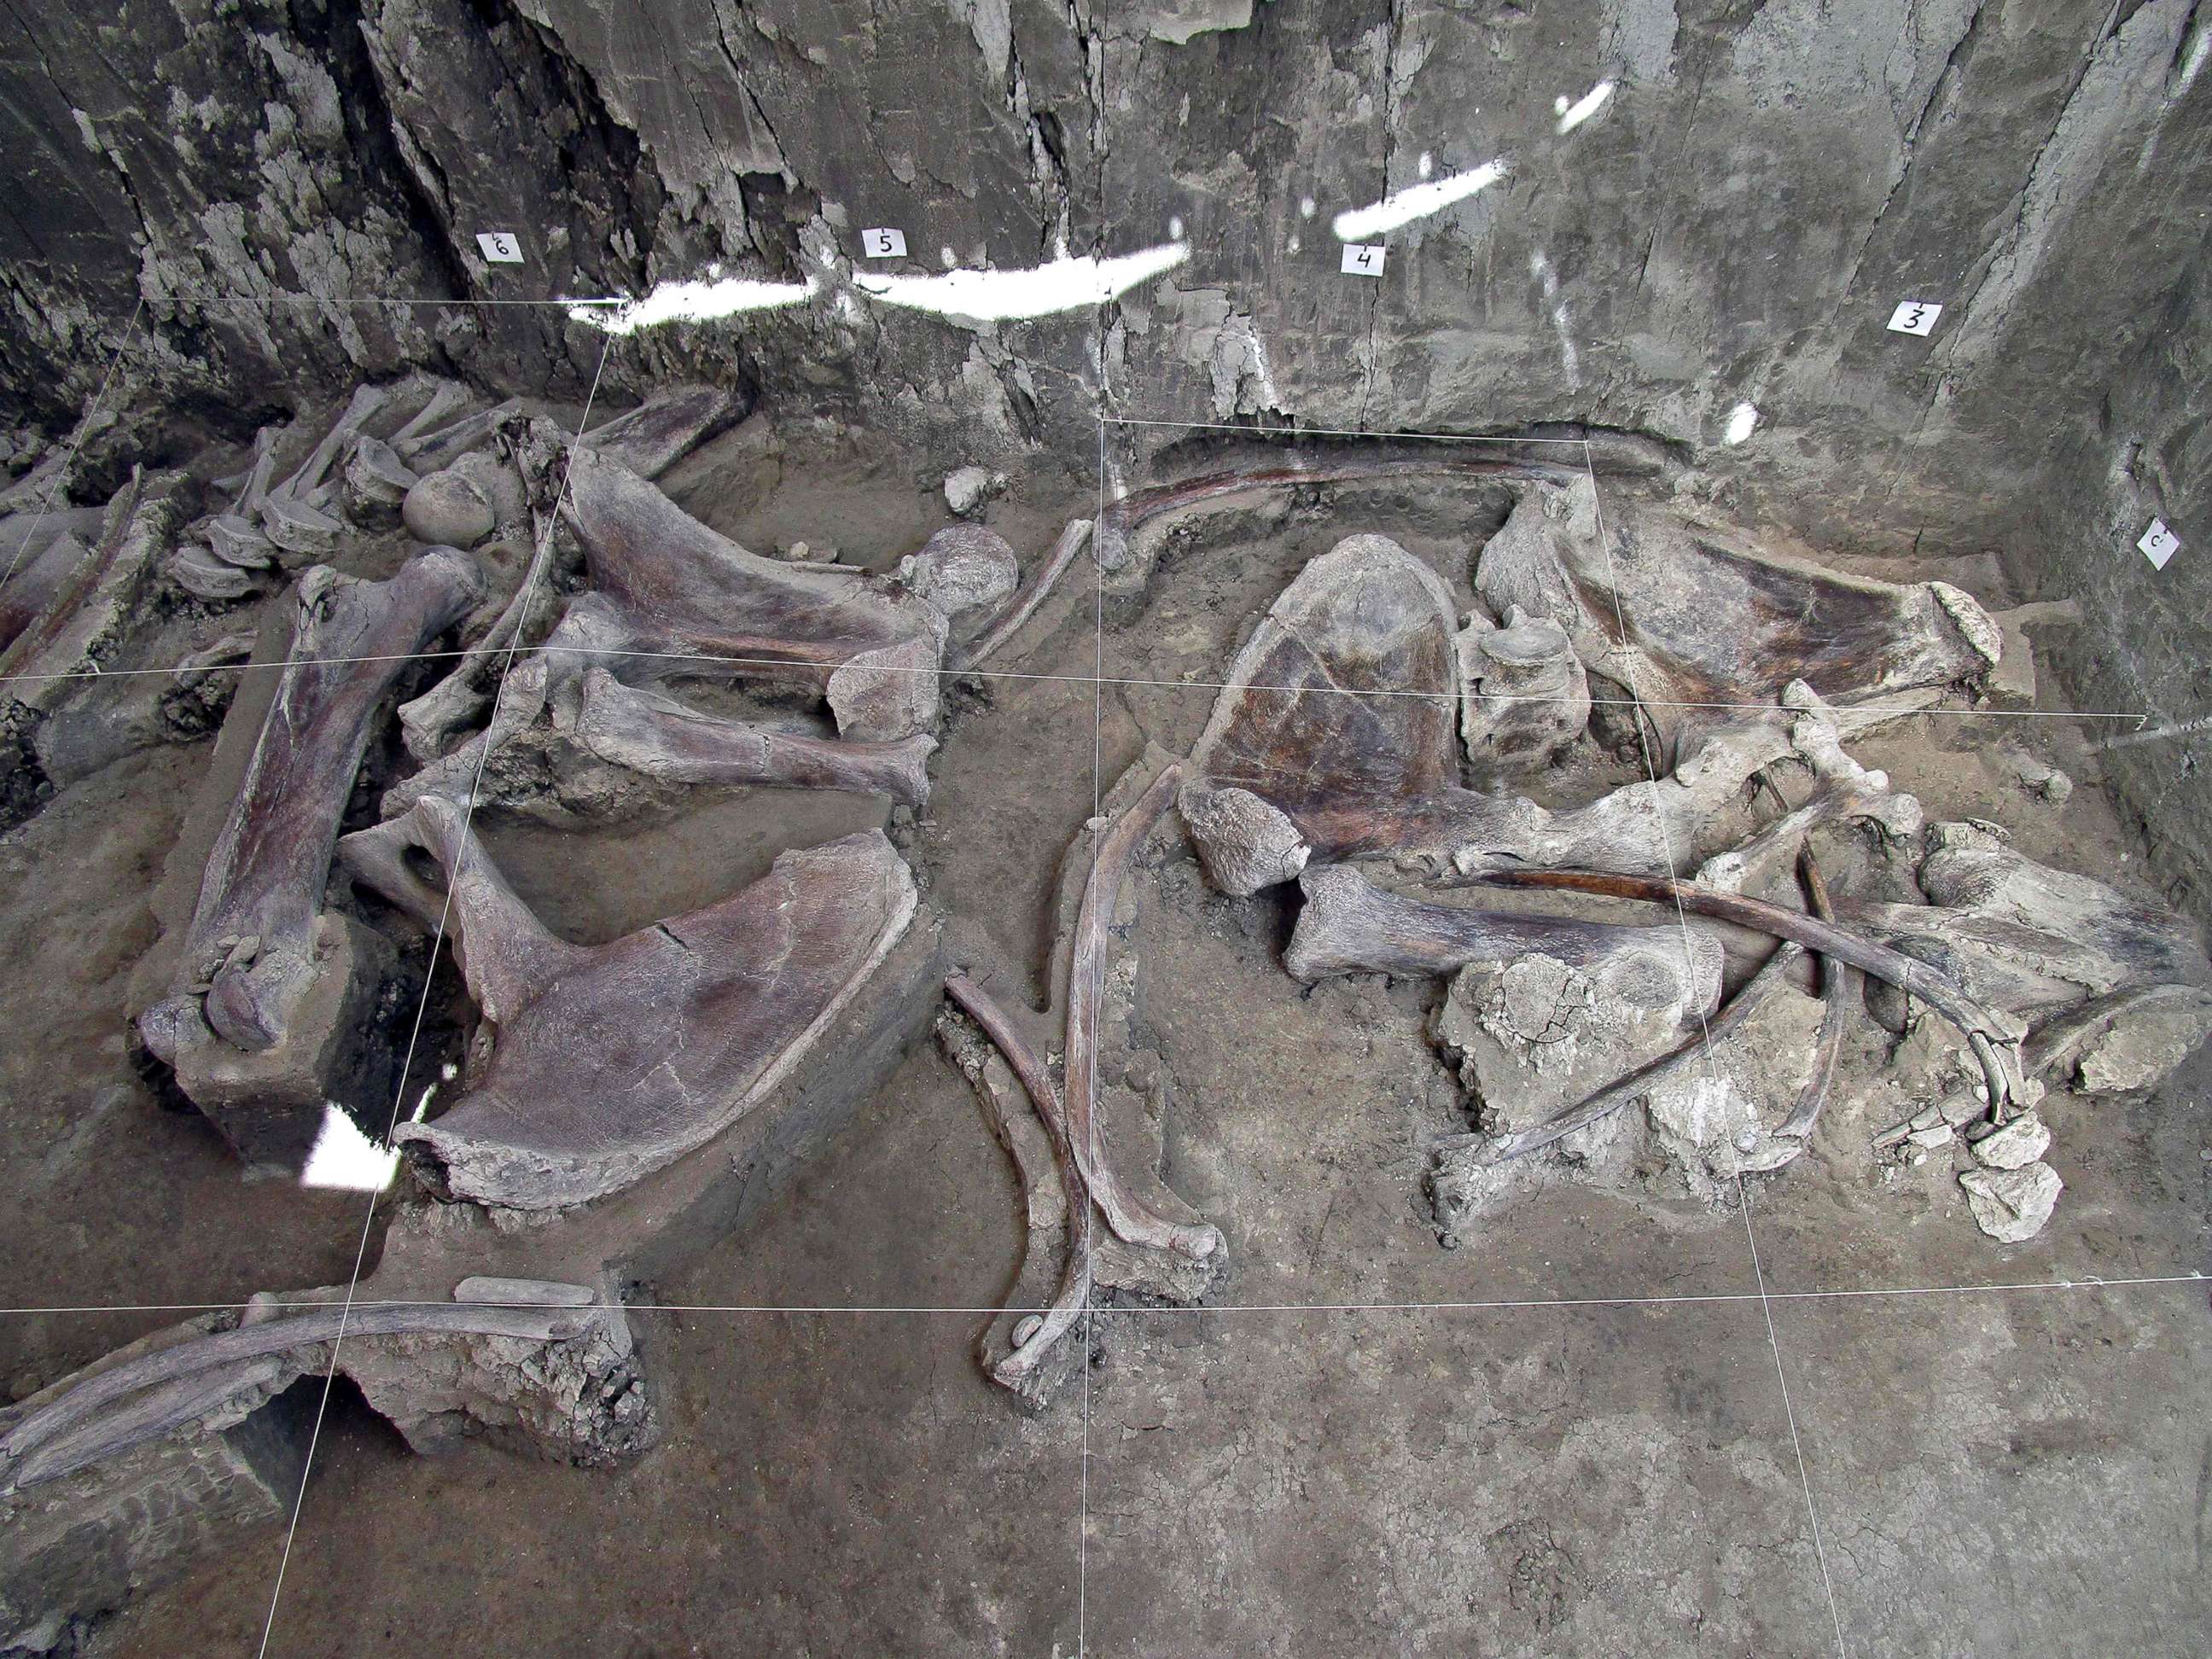 PHOTO: The bones of at least 14 mammoths bones were found in what is believed to be the first mammoth trap set by humans, in Tultepec, Mexico, in a photo released by Mexico's National Institute of Anthropology (INAH).